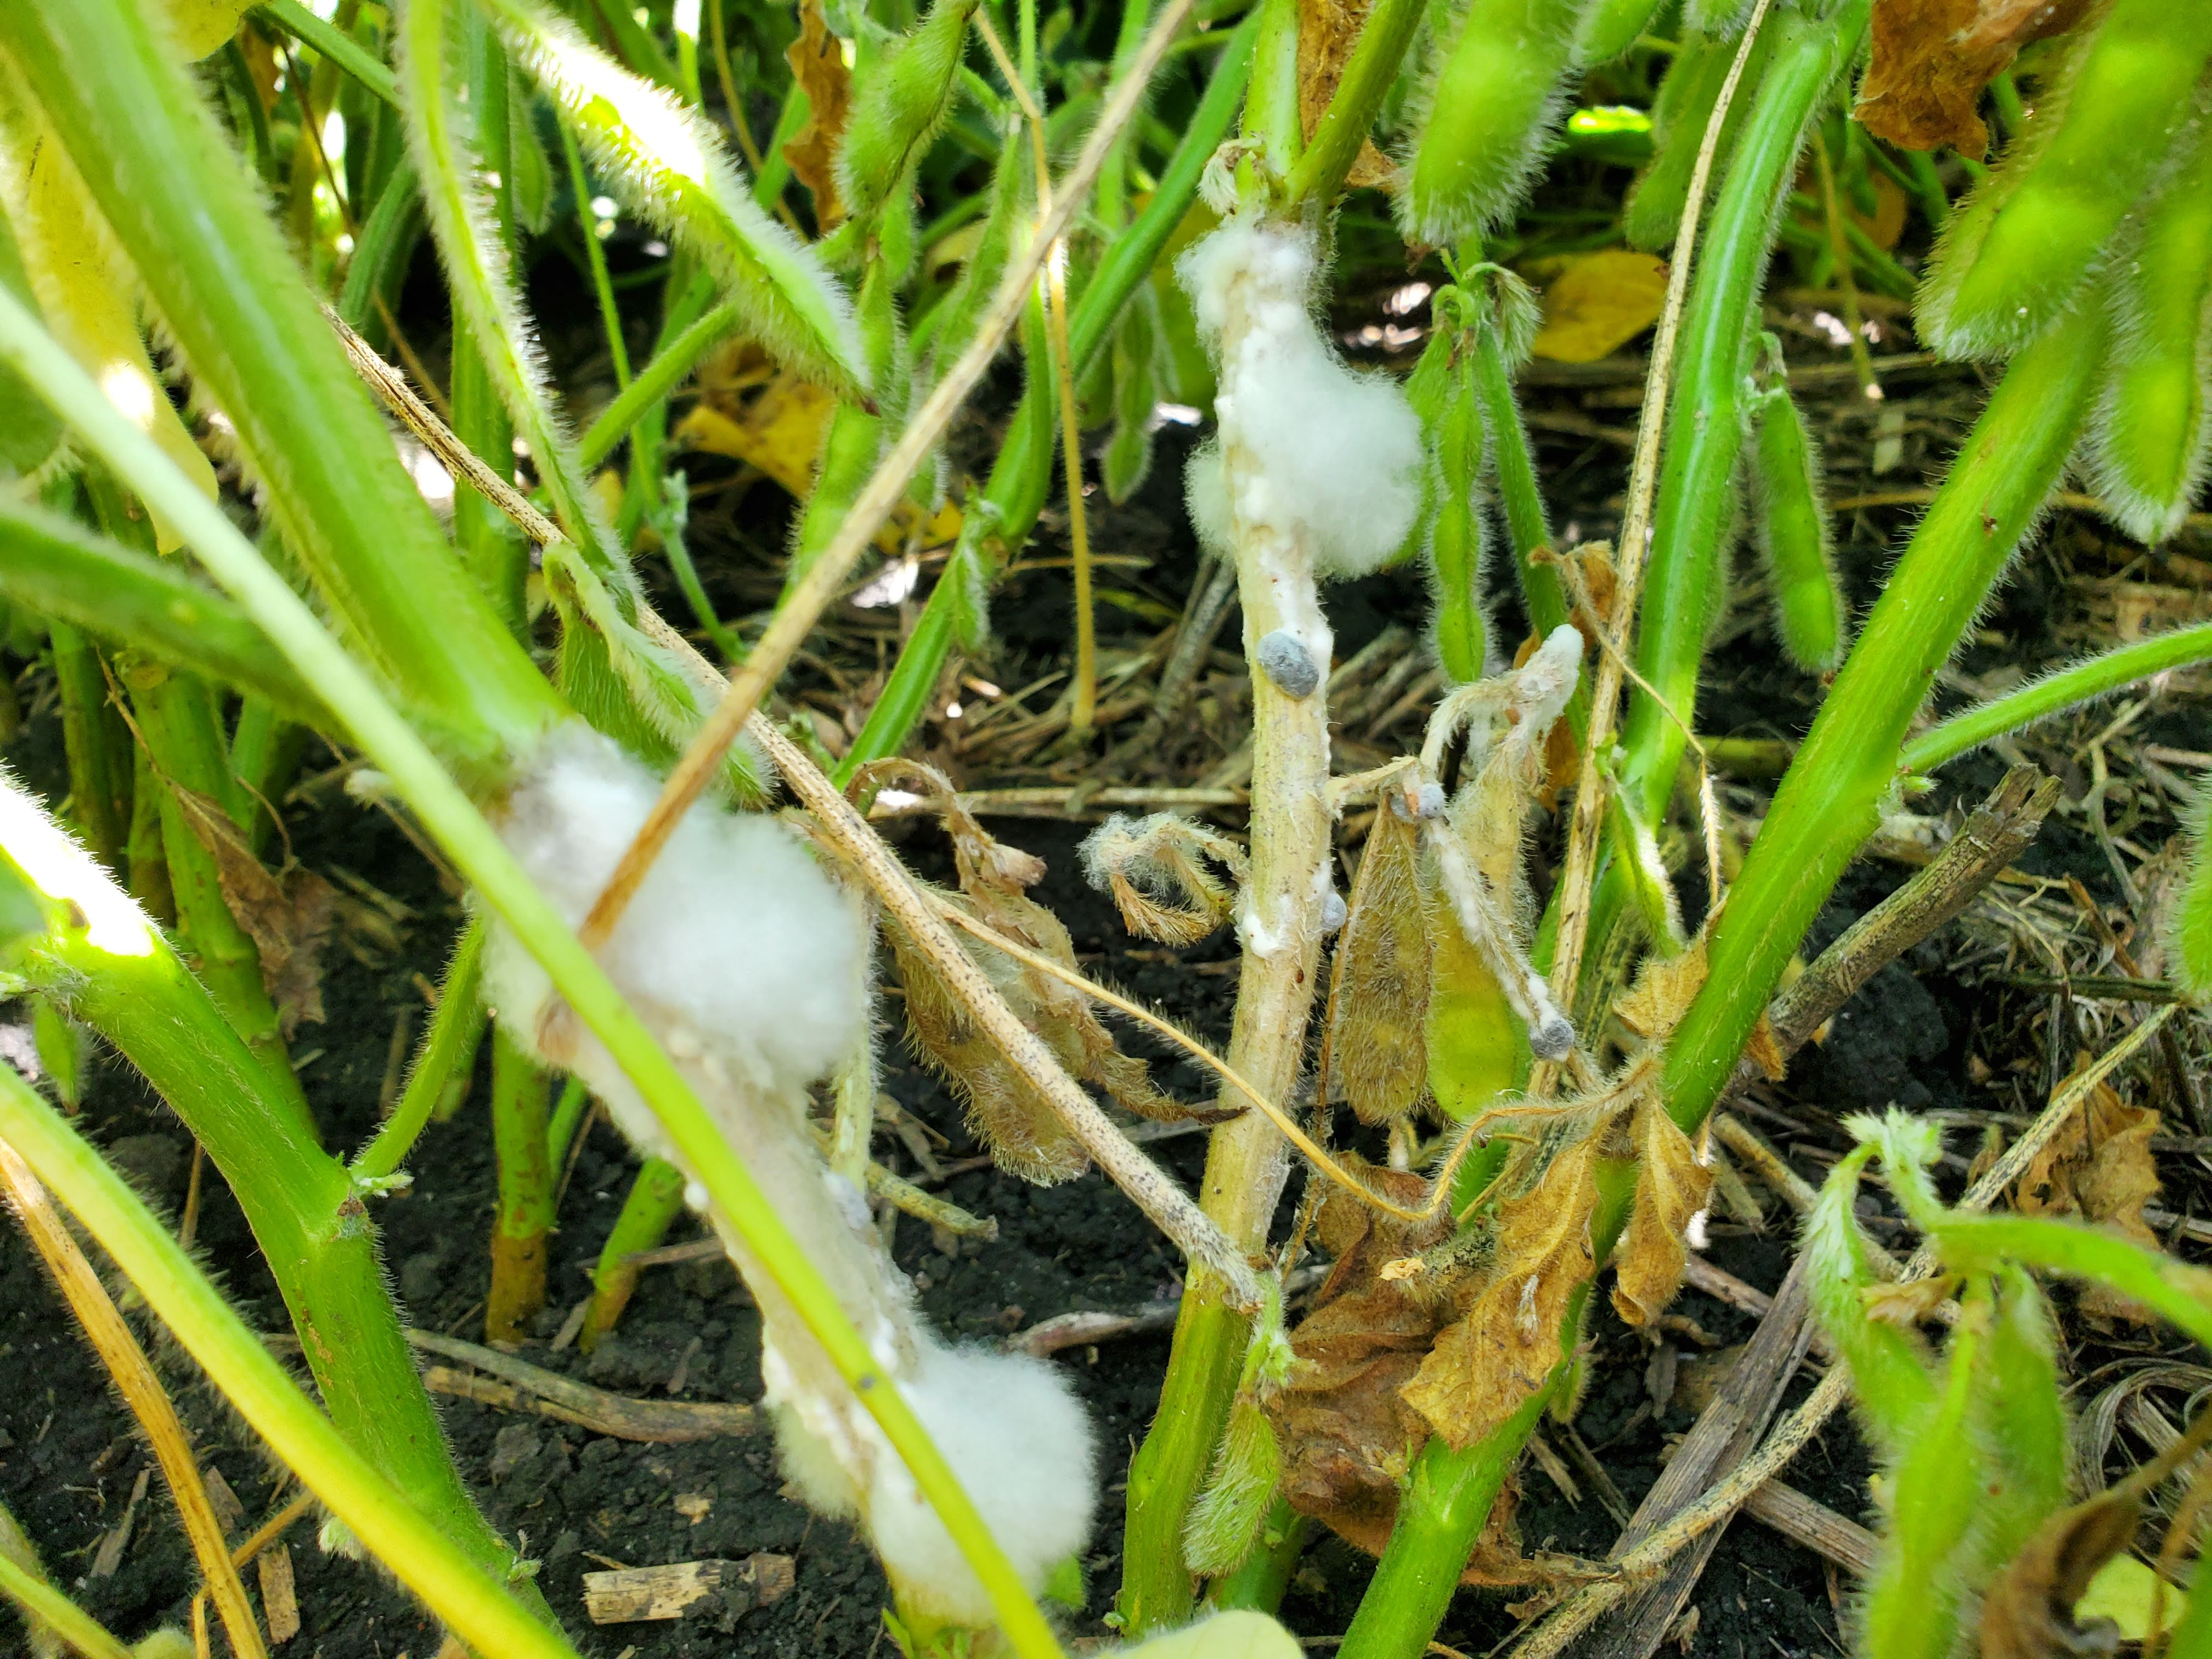 soybean stems fully girdled with white mold and external sclerotia